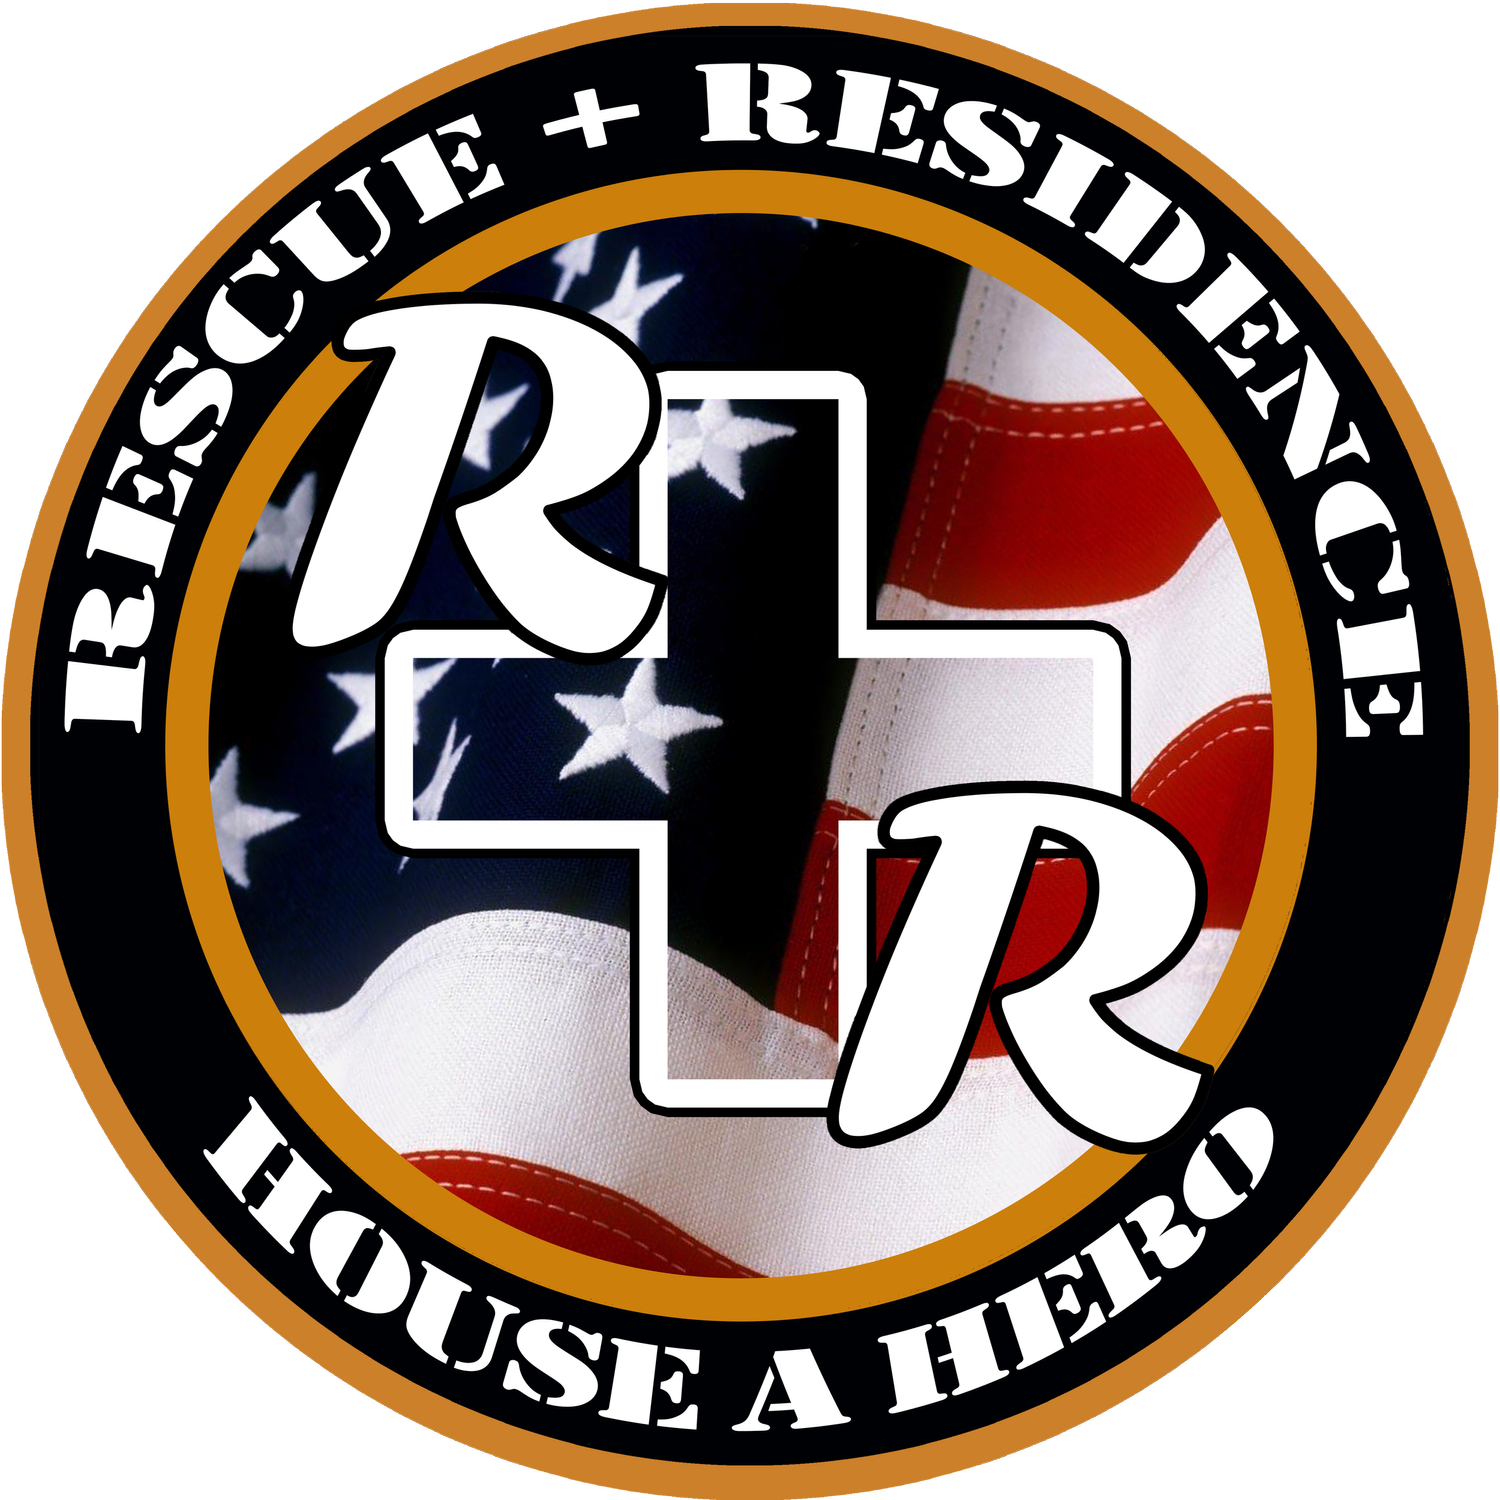 Rescue + Residence